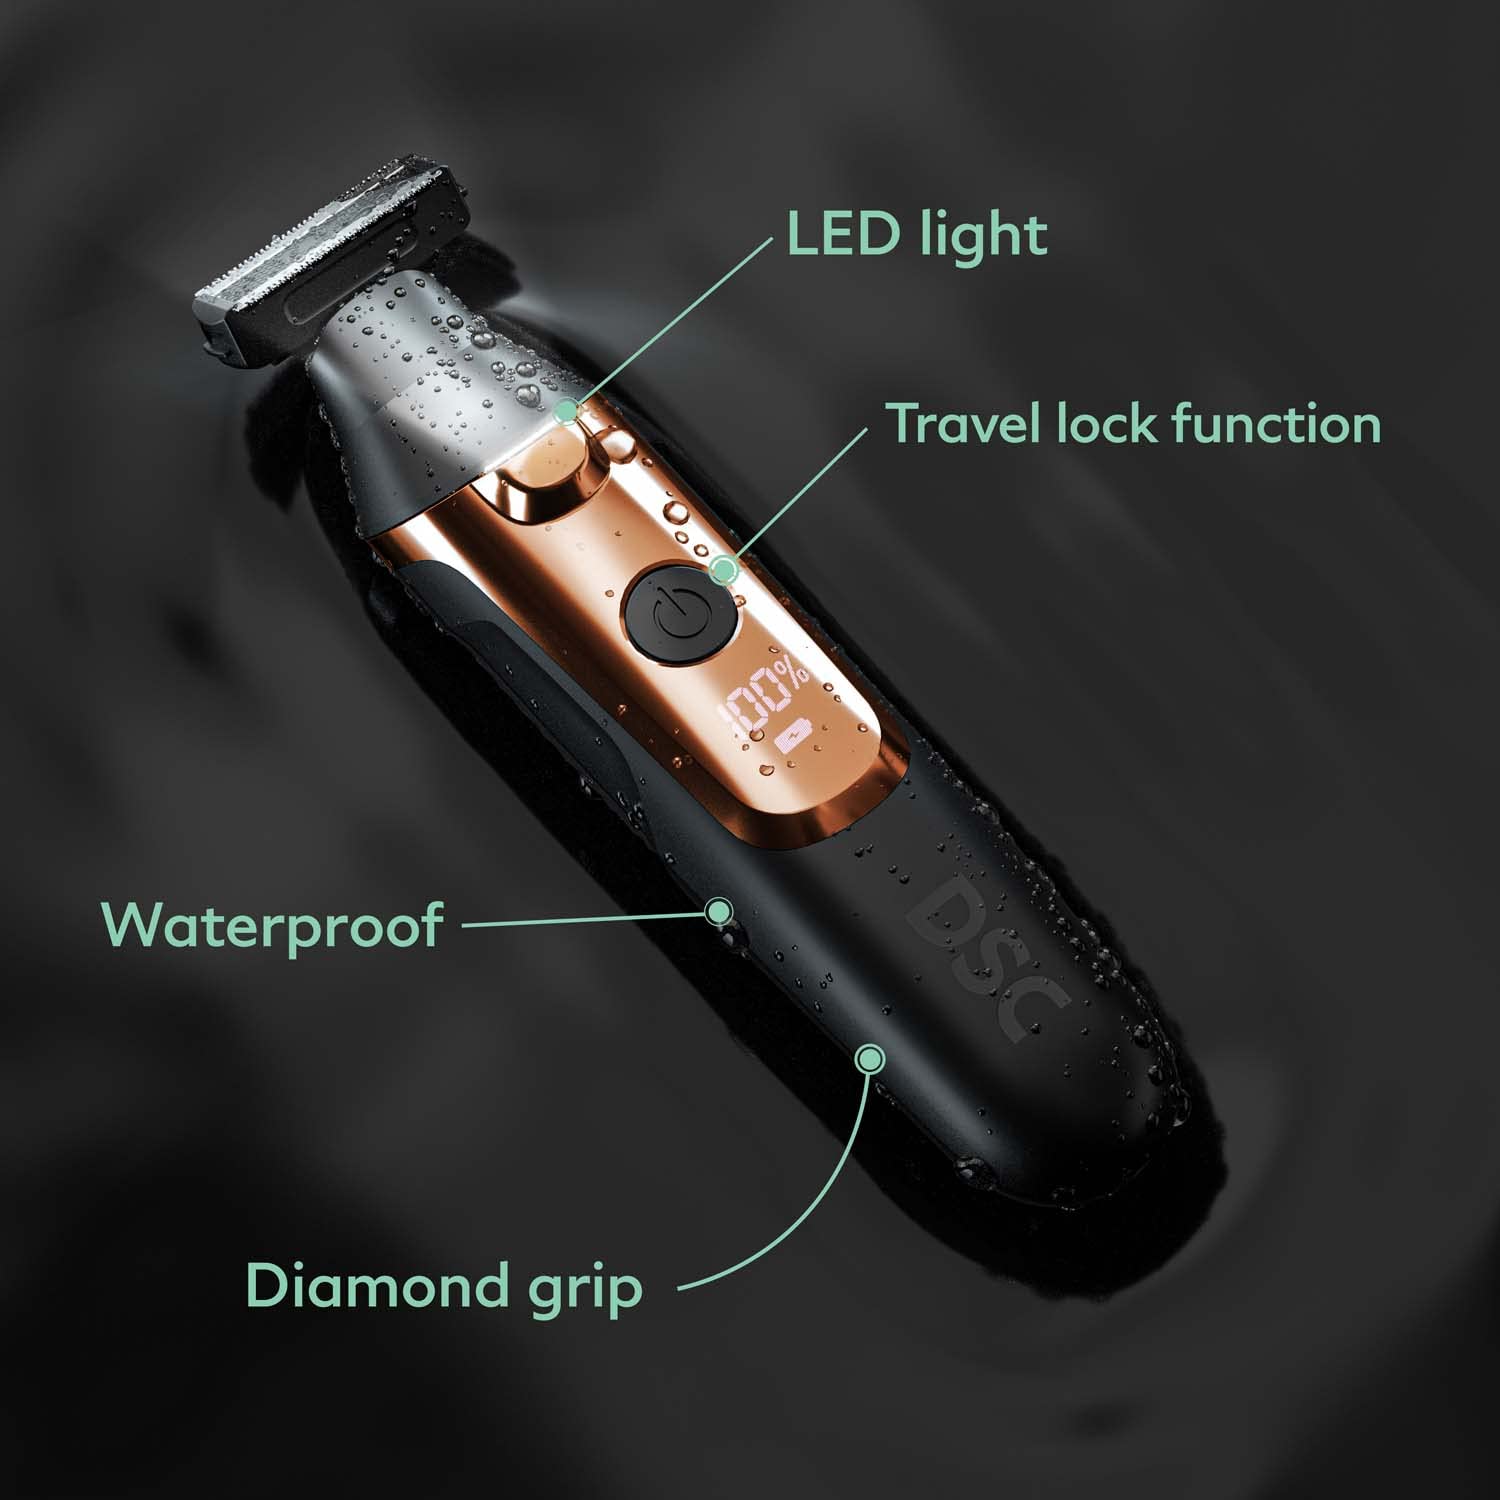 Dollar Shave Club | Double Header Trimmer | Electric Razor with a Beard Head & Separate Body Grooming Head | Waterproof Body Shaver & Beard Trimmer, Black